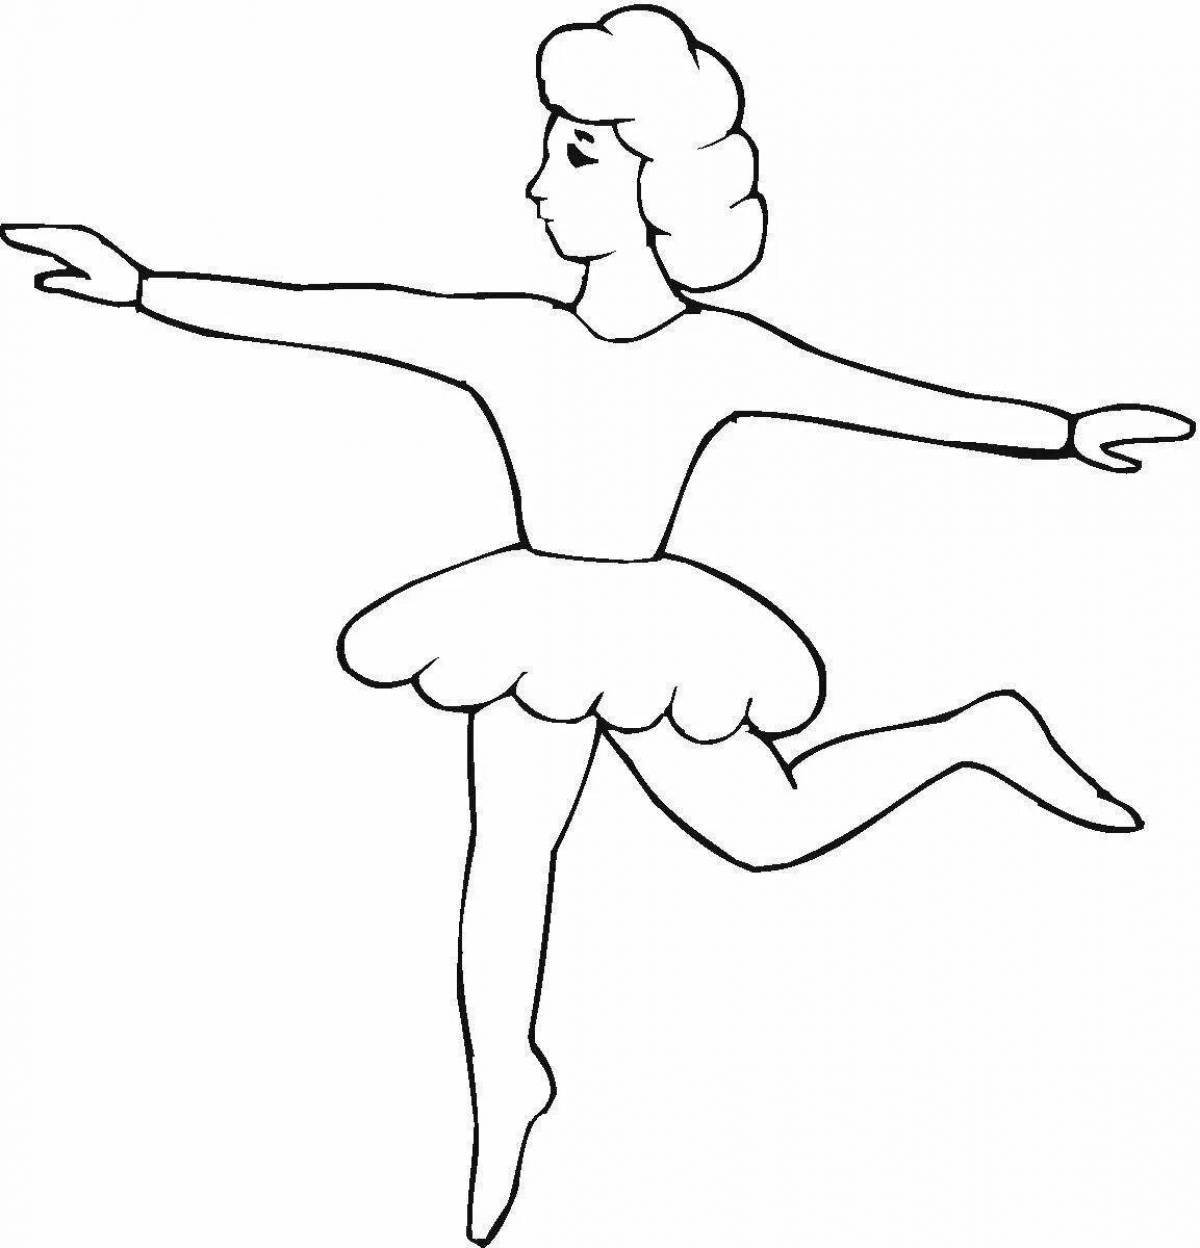 Great swan lake coloring book for students